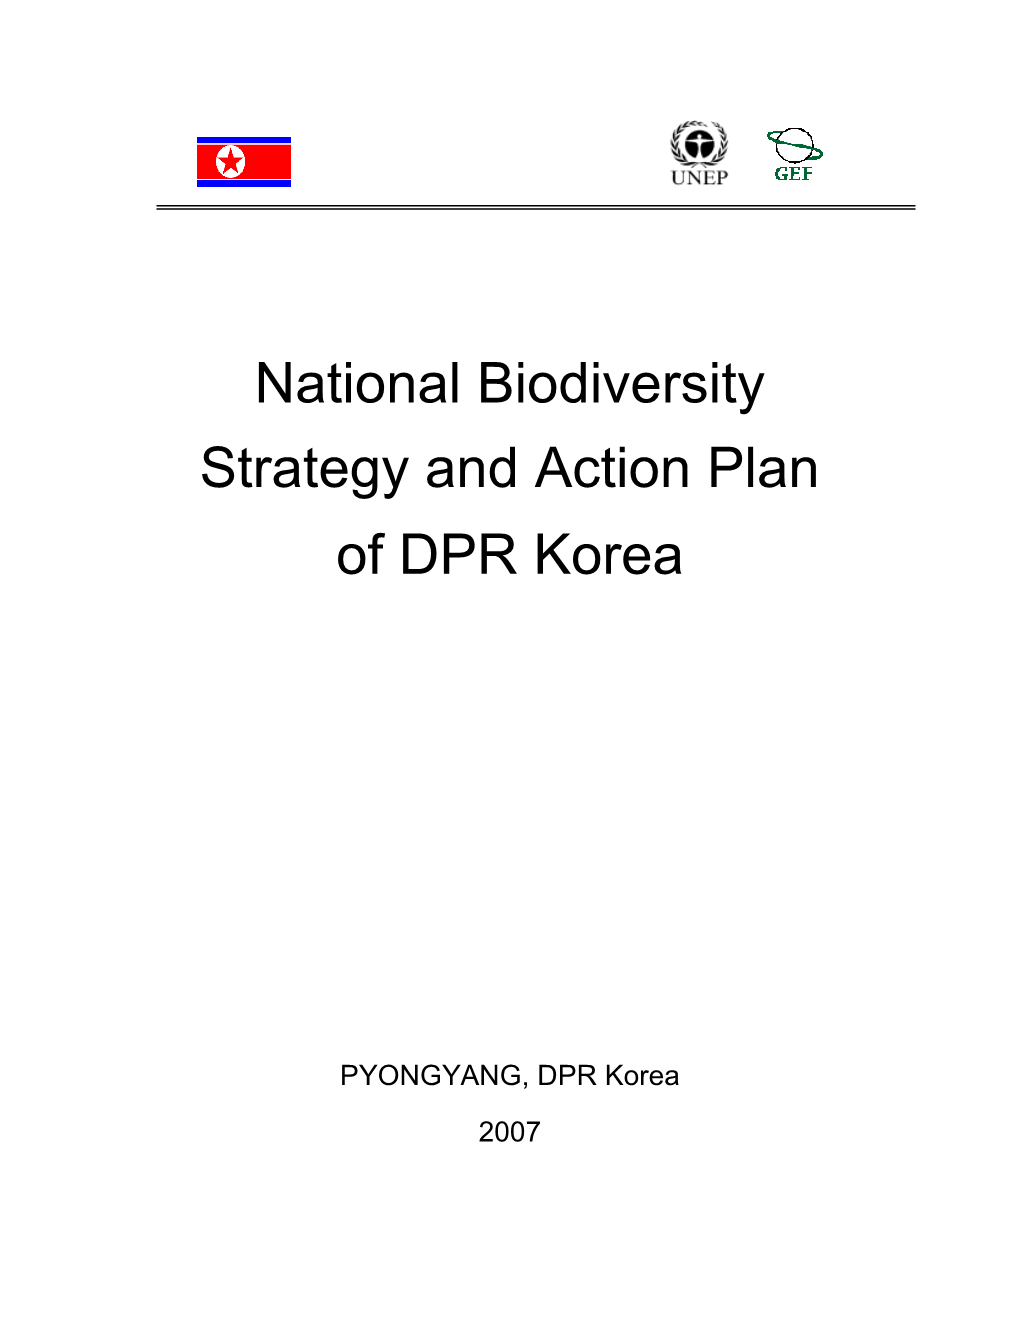 National Biodiversity Strategy and Action Plan of DPR Korea 2007